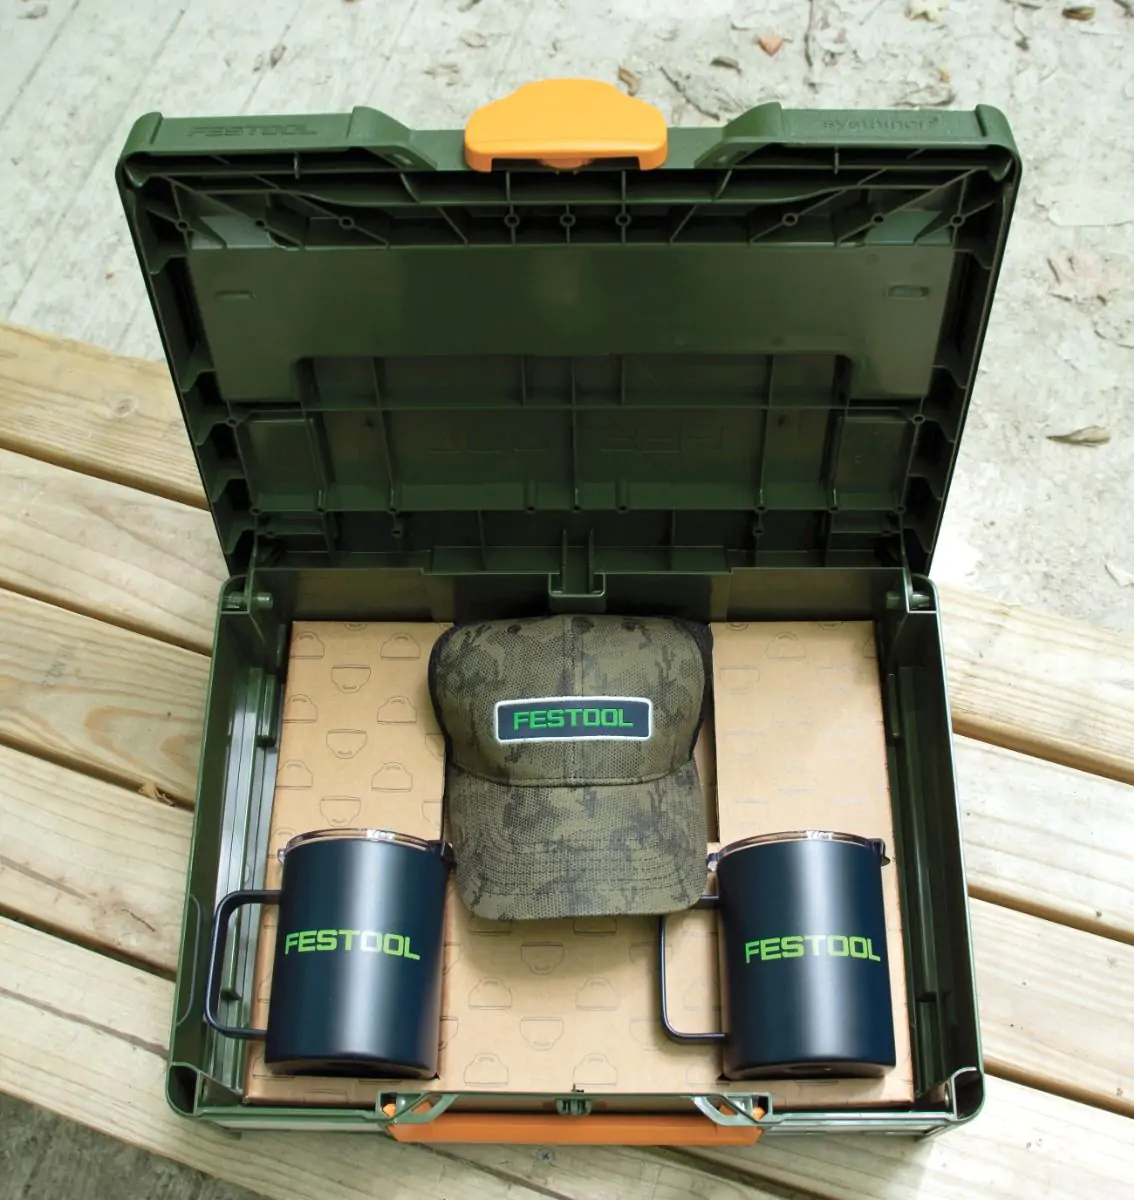 Systainer opened up to display a Festool hat and two Festool mugs. 